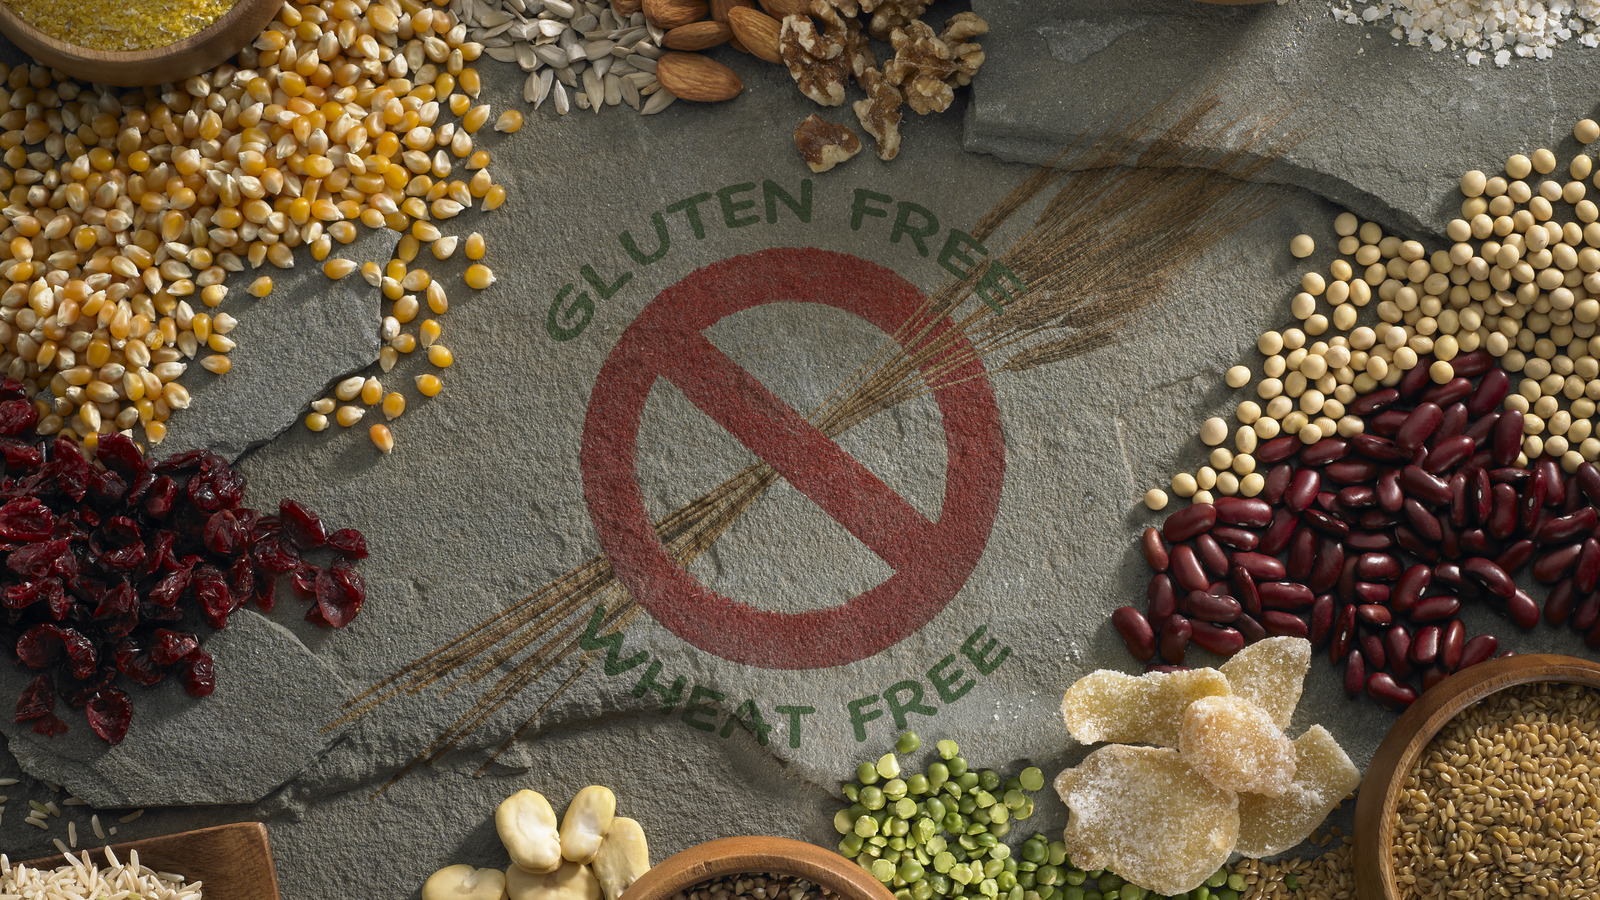 The Ultimate Guide To Eating Gluten-Free